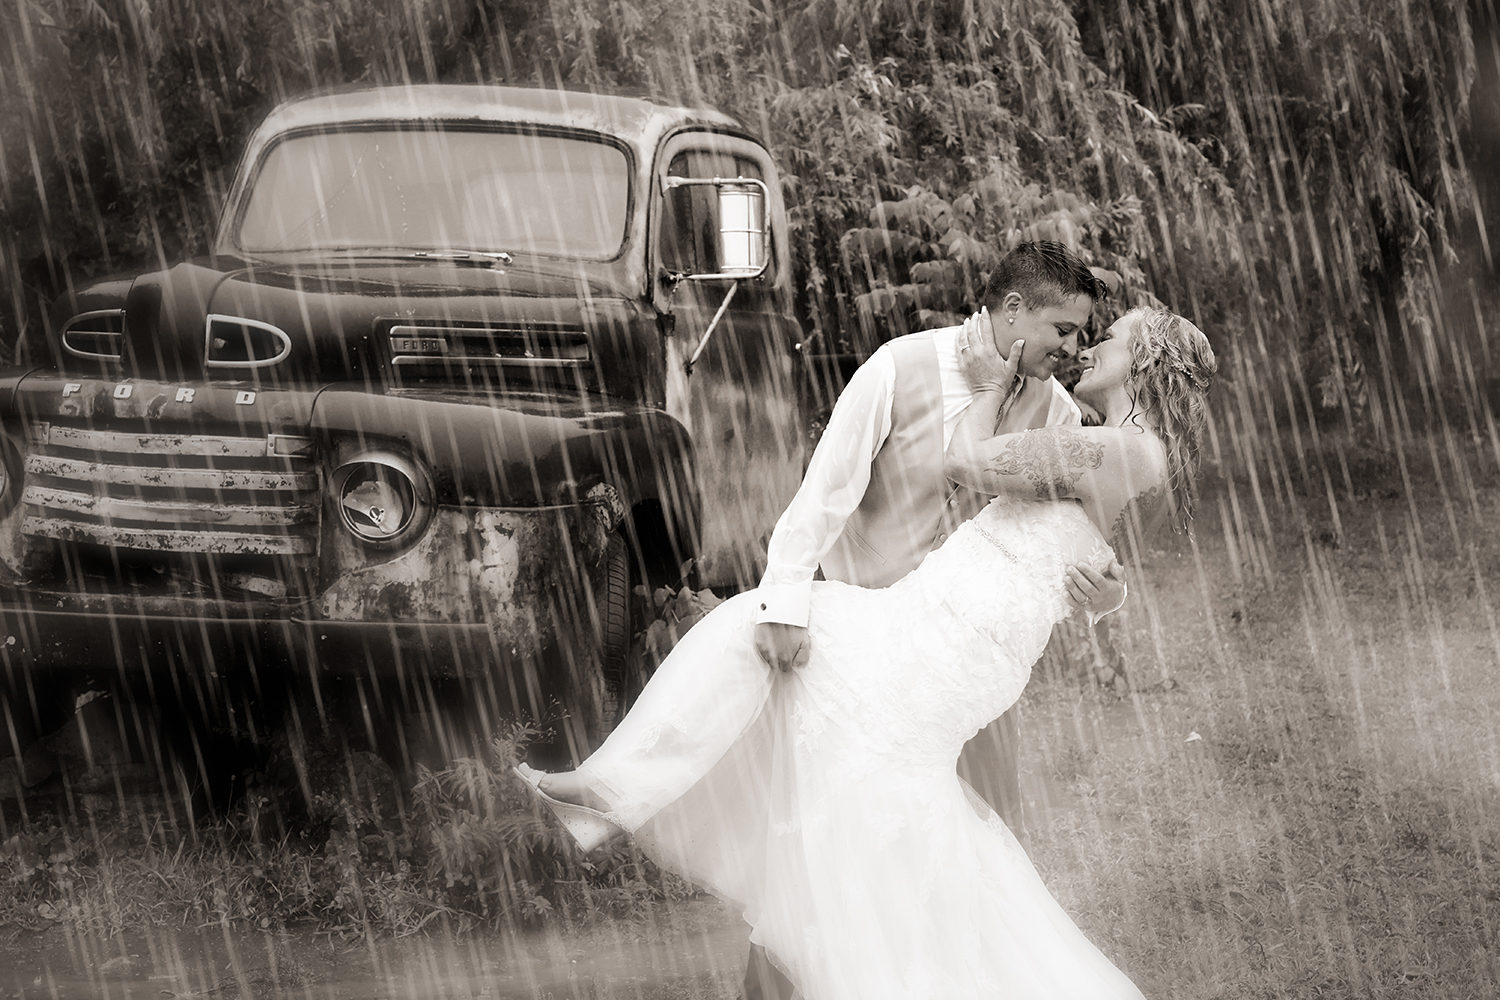 Bride dipping her bride by an old truck in the rain